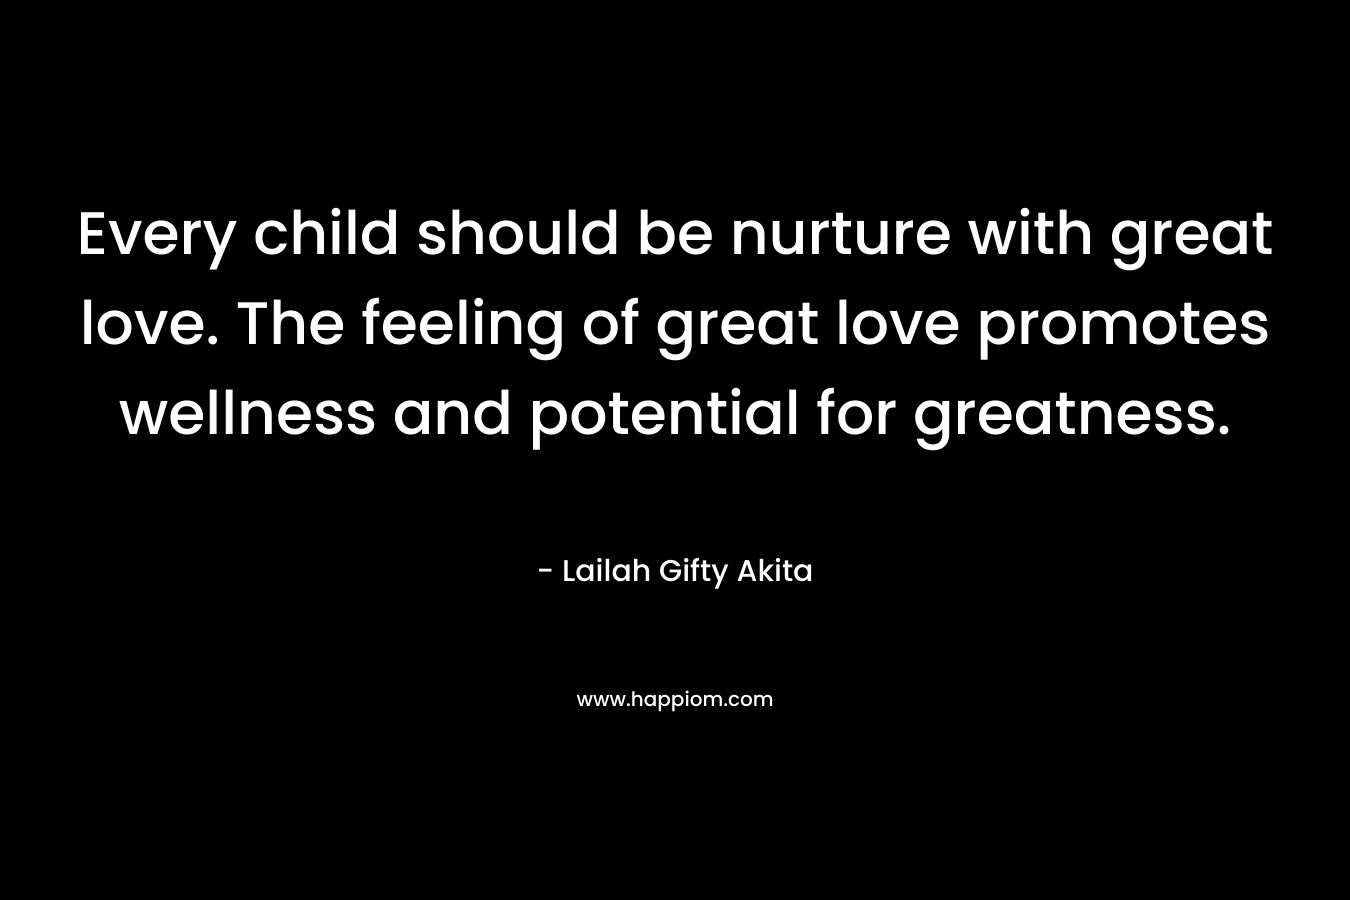 Every child should be nurture with great love. The feeling of great love promotes wellness and potential for greatness. – Lailah Gifty Akita